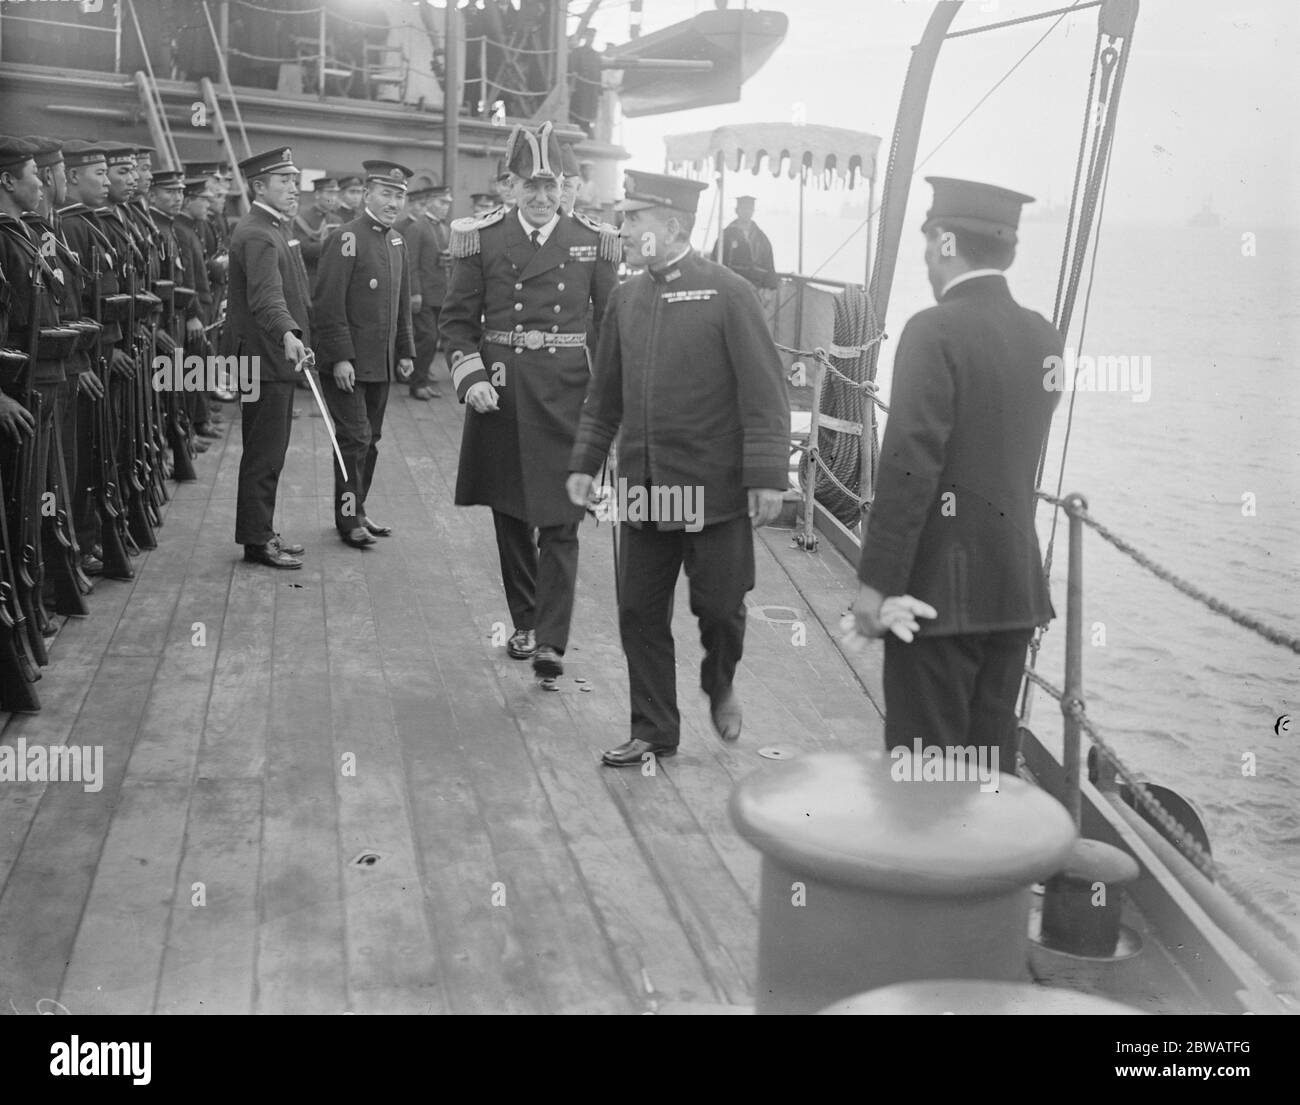 Japanese Naval Visit To England The Japanese training squadron consisting of the two cruisers ' Yakumo ' and ' Idzumo ' at Sheerness Rear Admiral Alderson making an inspection on board the ' Idzumo ' 29 November 1921 Stock Photo